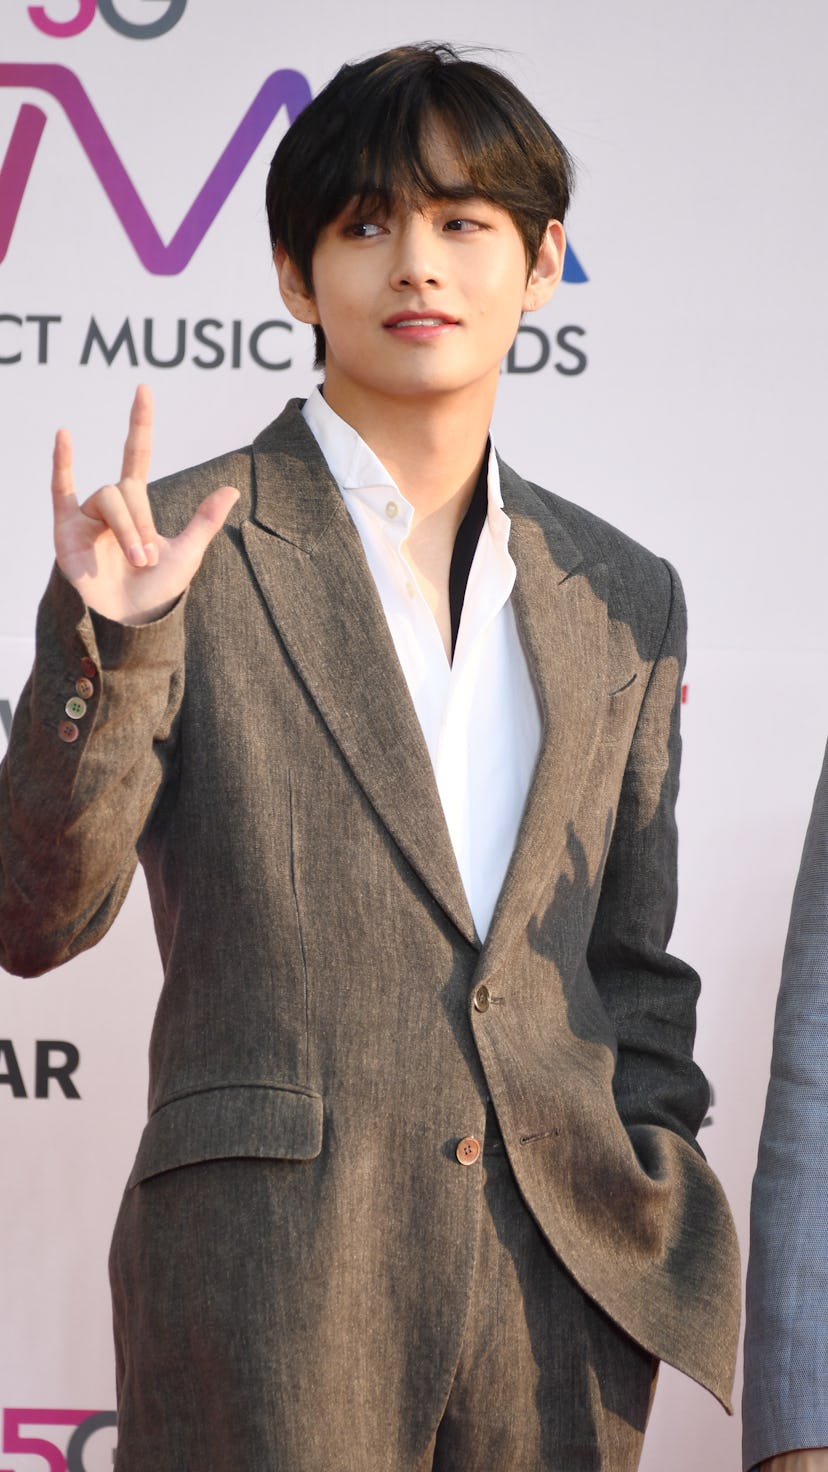 INCHEON, SOUTH KOREA – APRIL 24 : Kim Tae-Hyung member of BTS attends 'The Fact Music Awards’ held a...